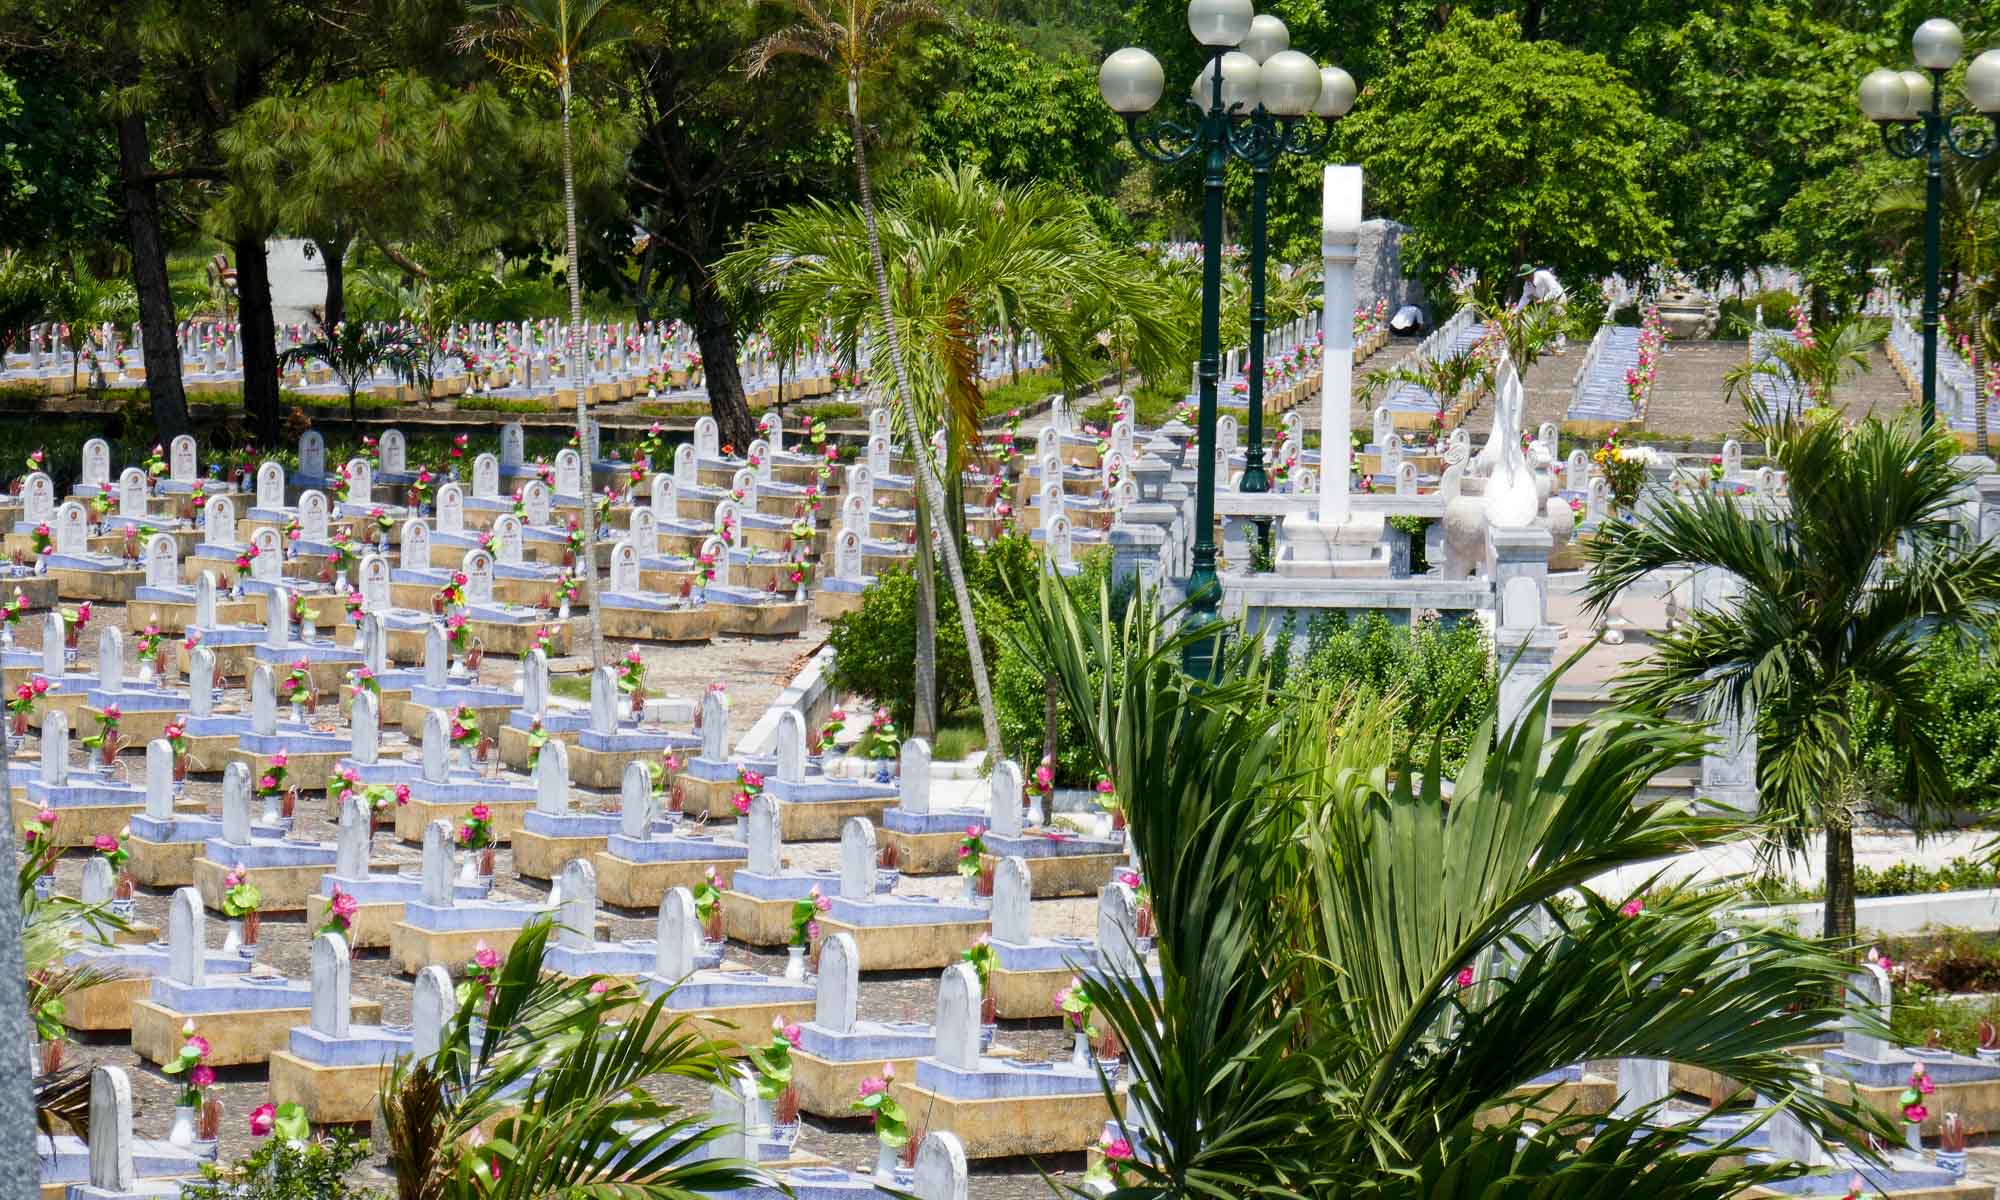 Graves at the cemetery